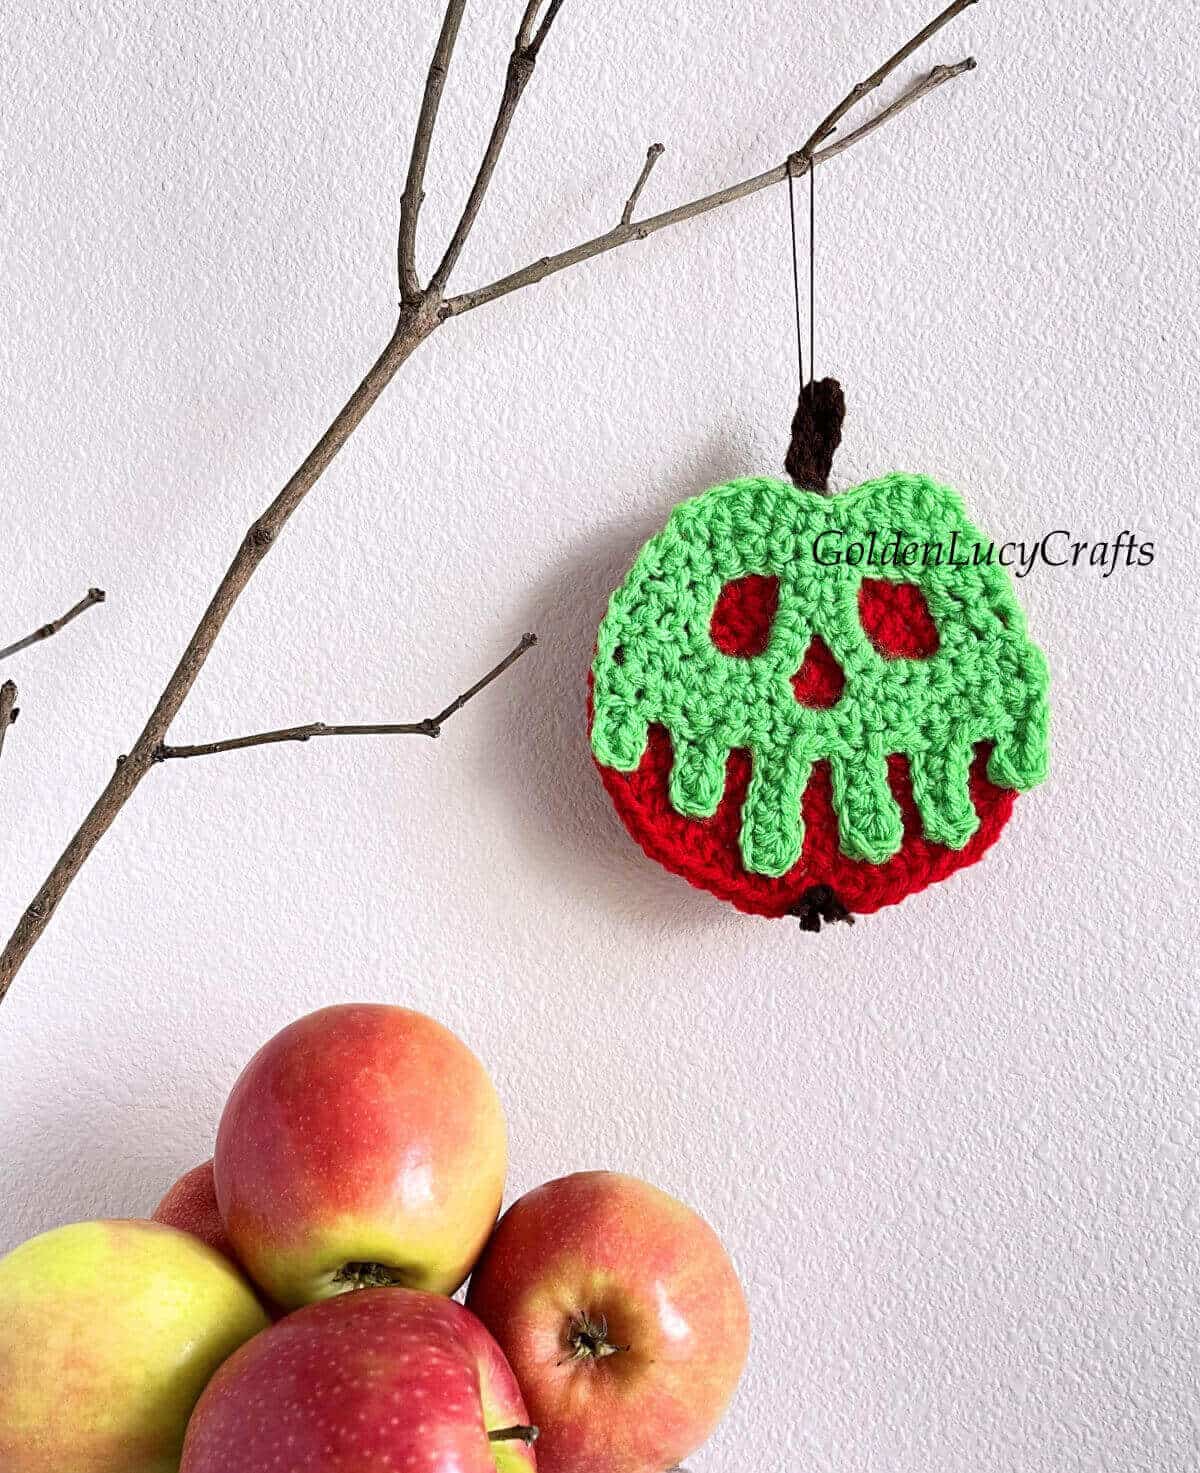 Crocheted poisoned apple ornament hanging on the branch.